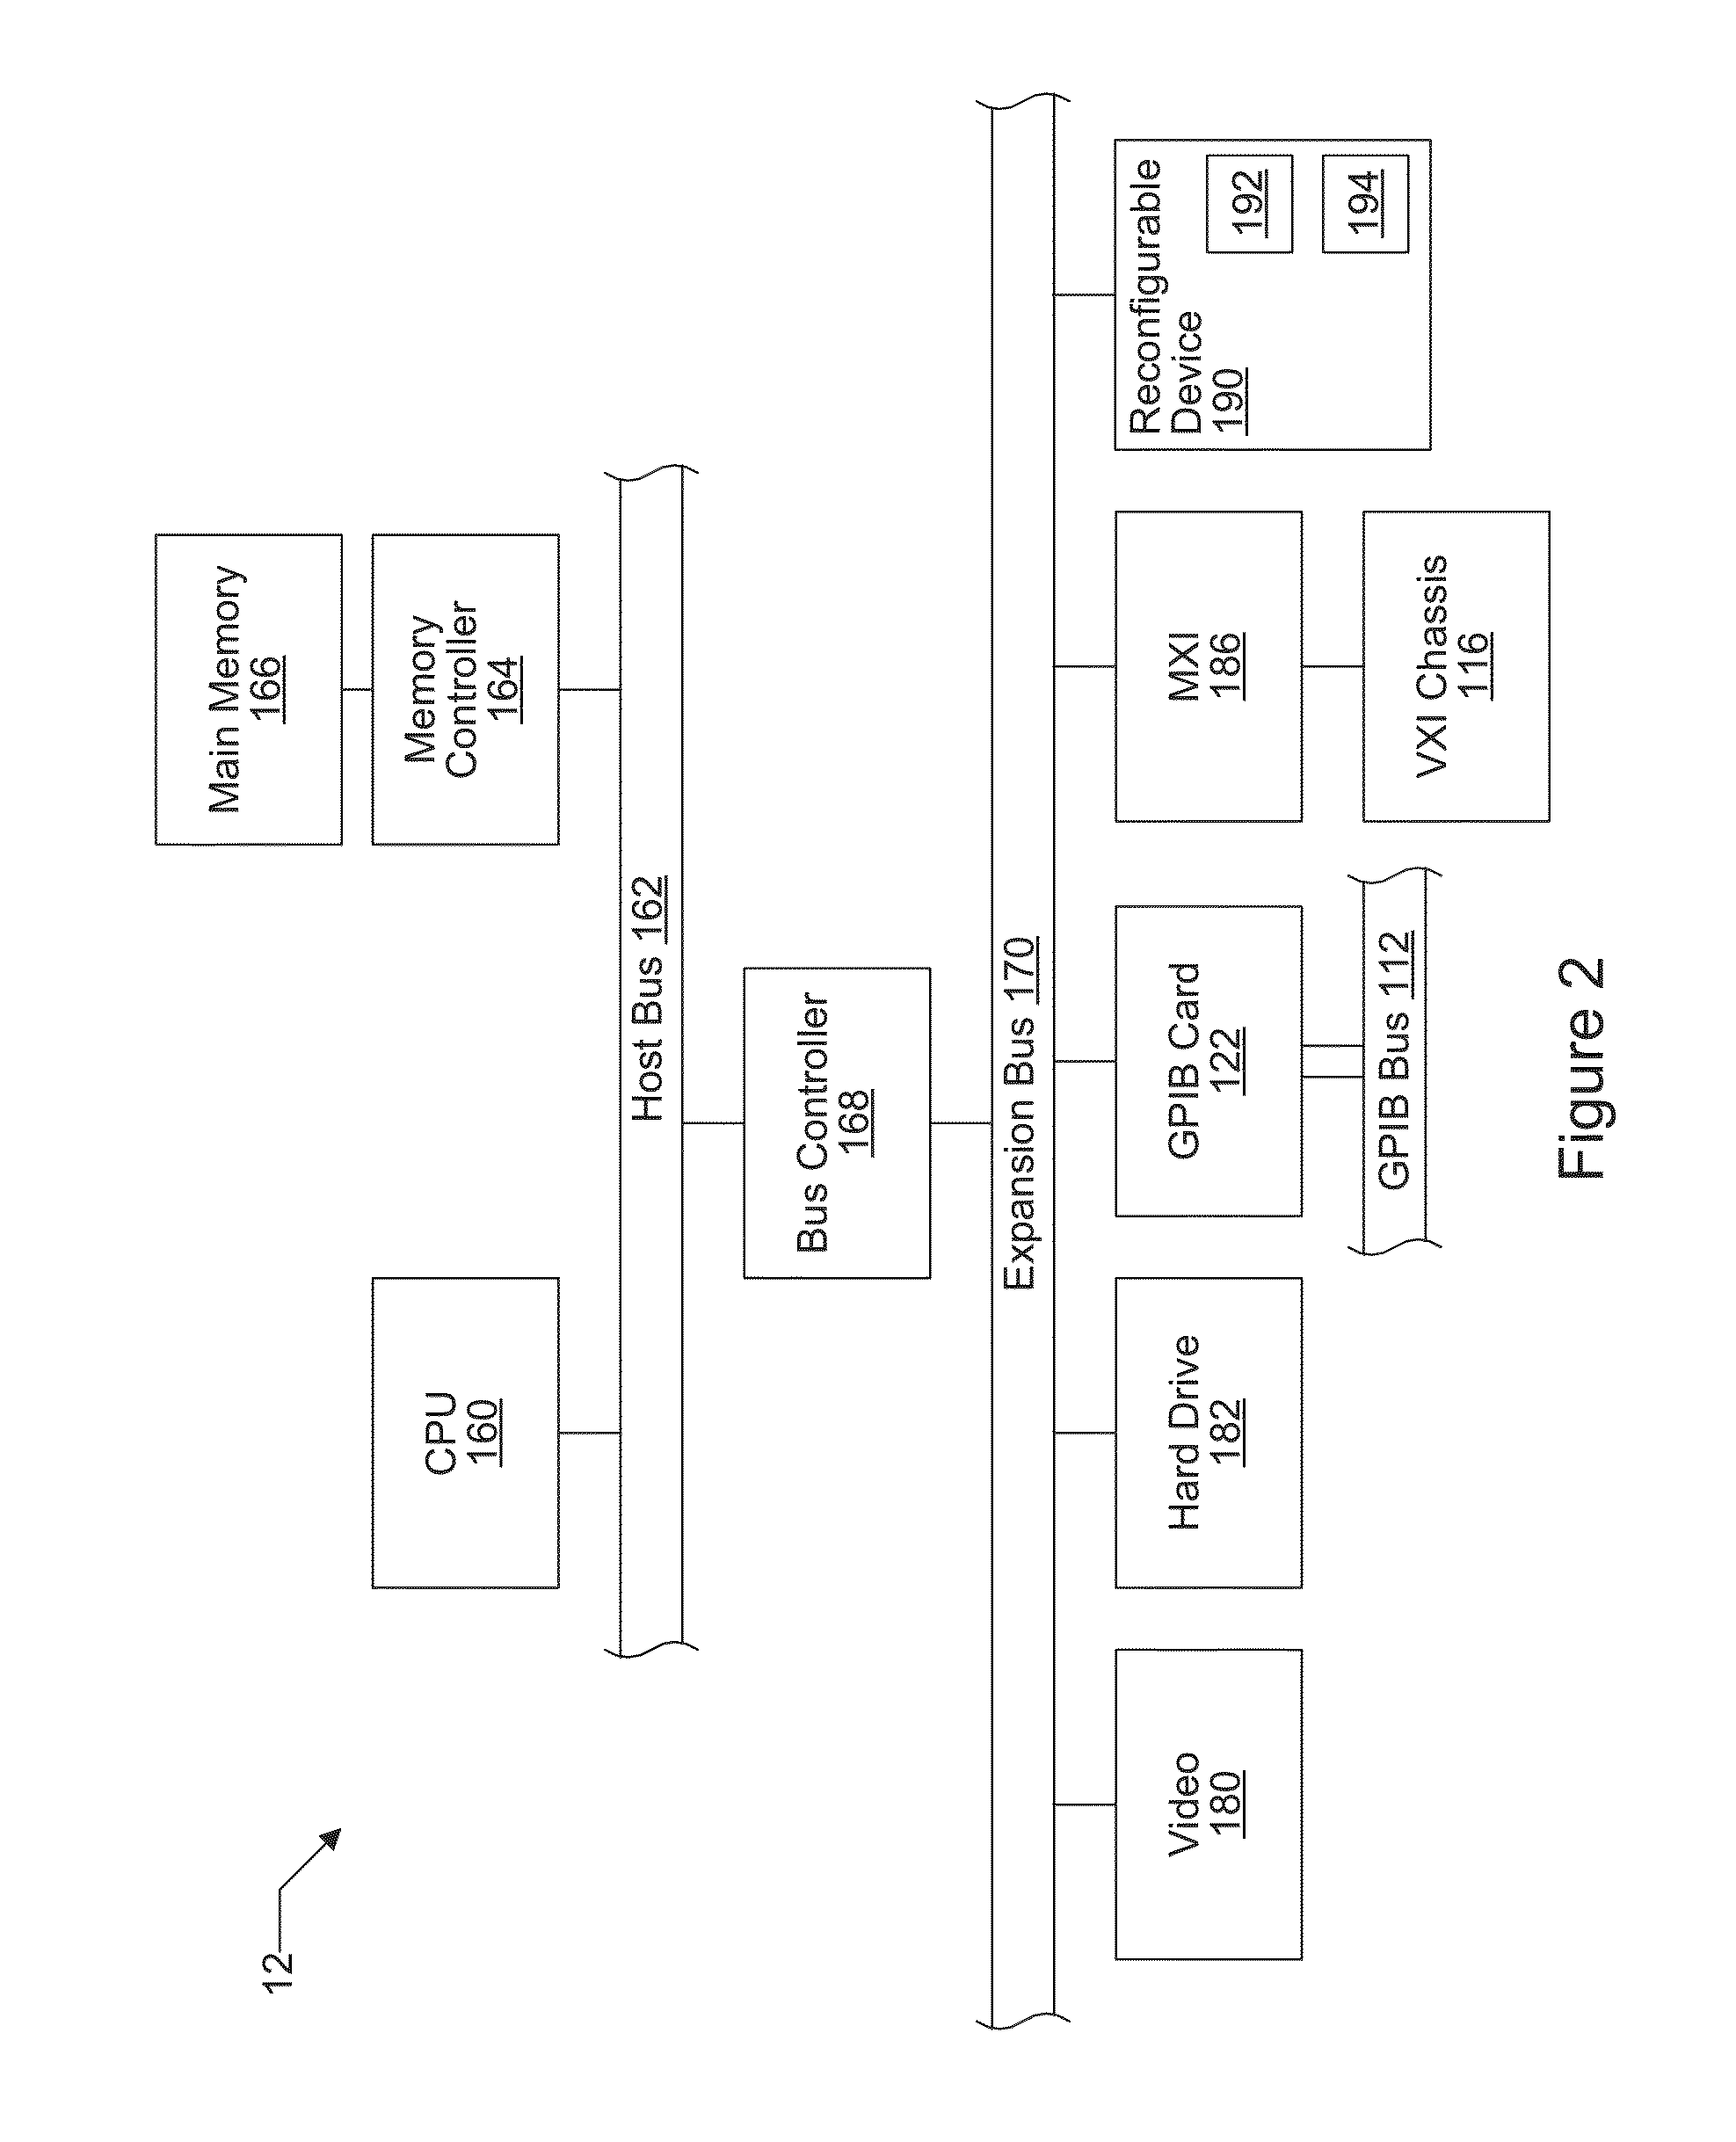 Systems and Methods for High Throughput Signal Processing Using Interleaved Data Converters